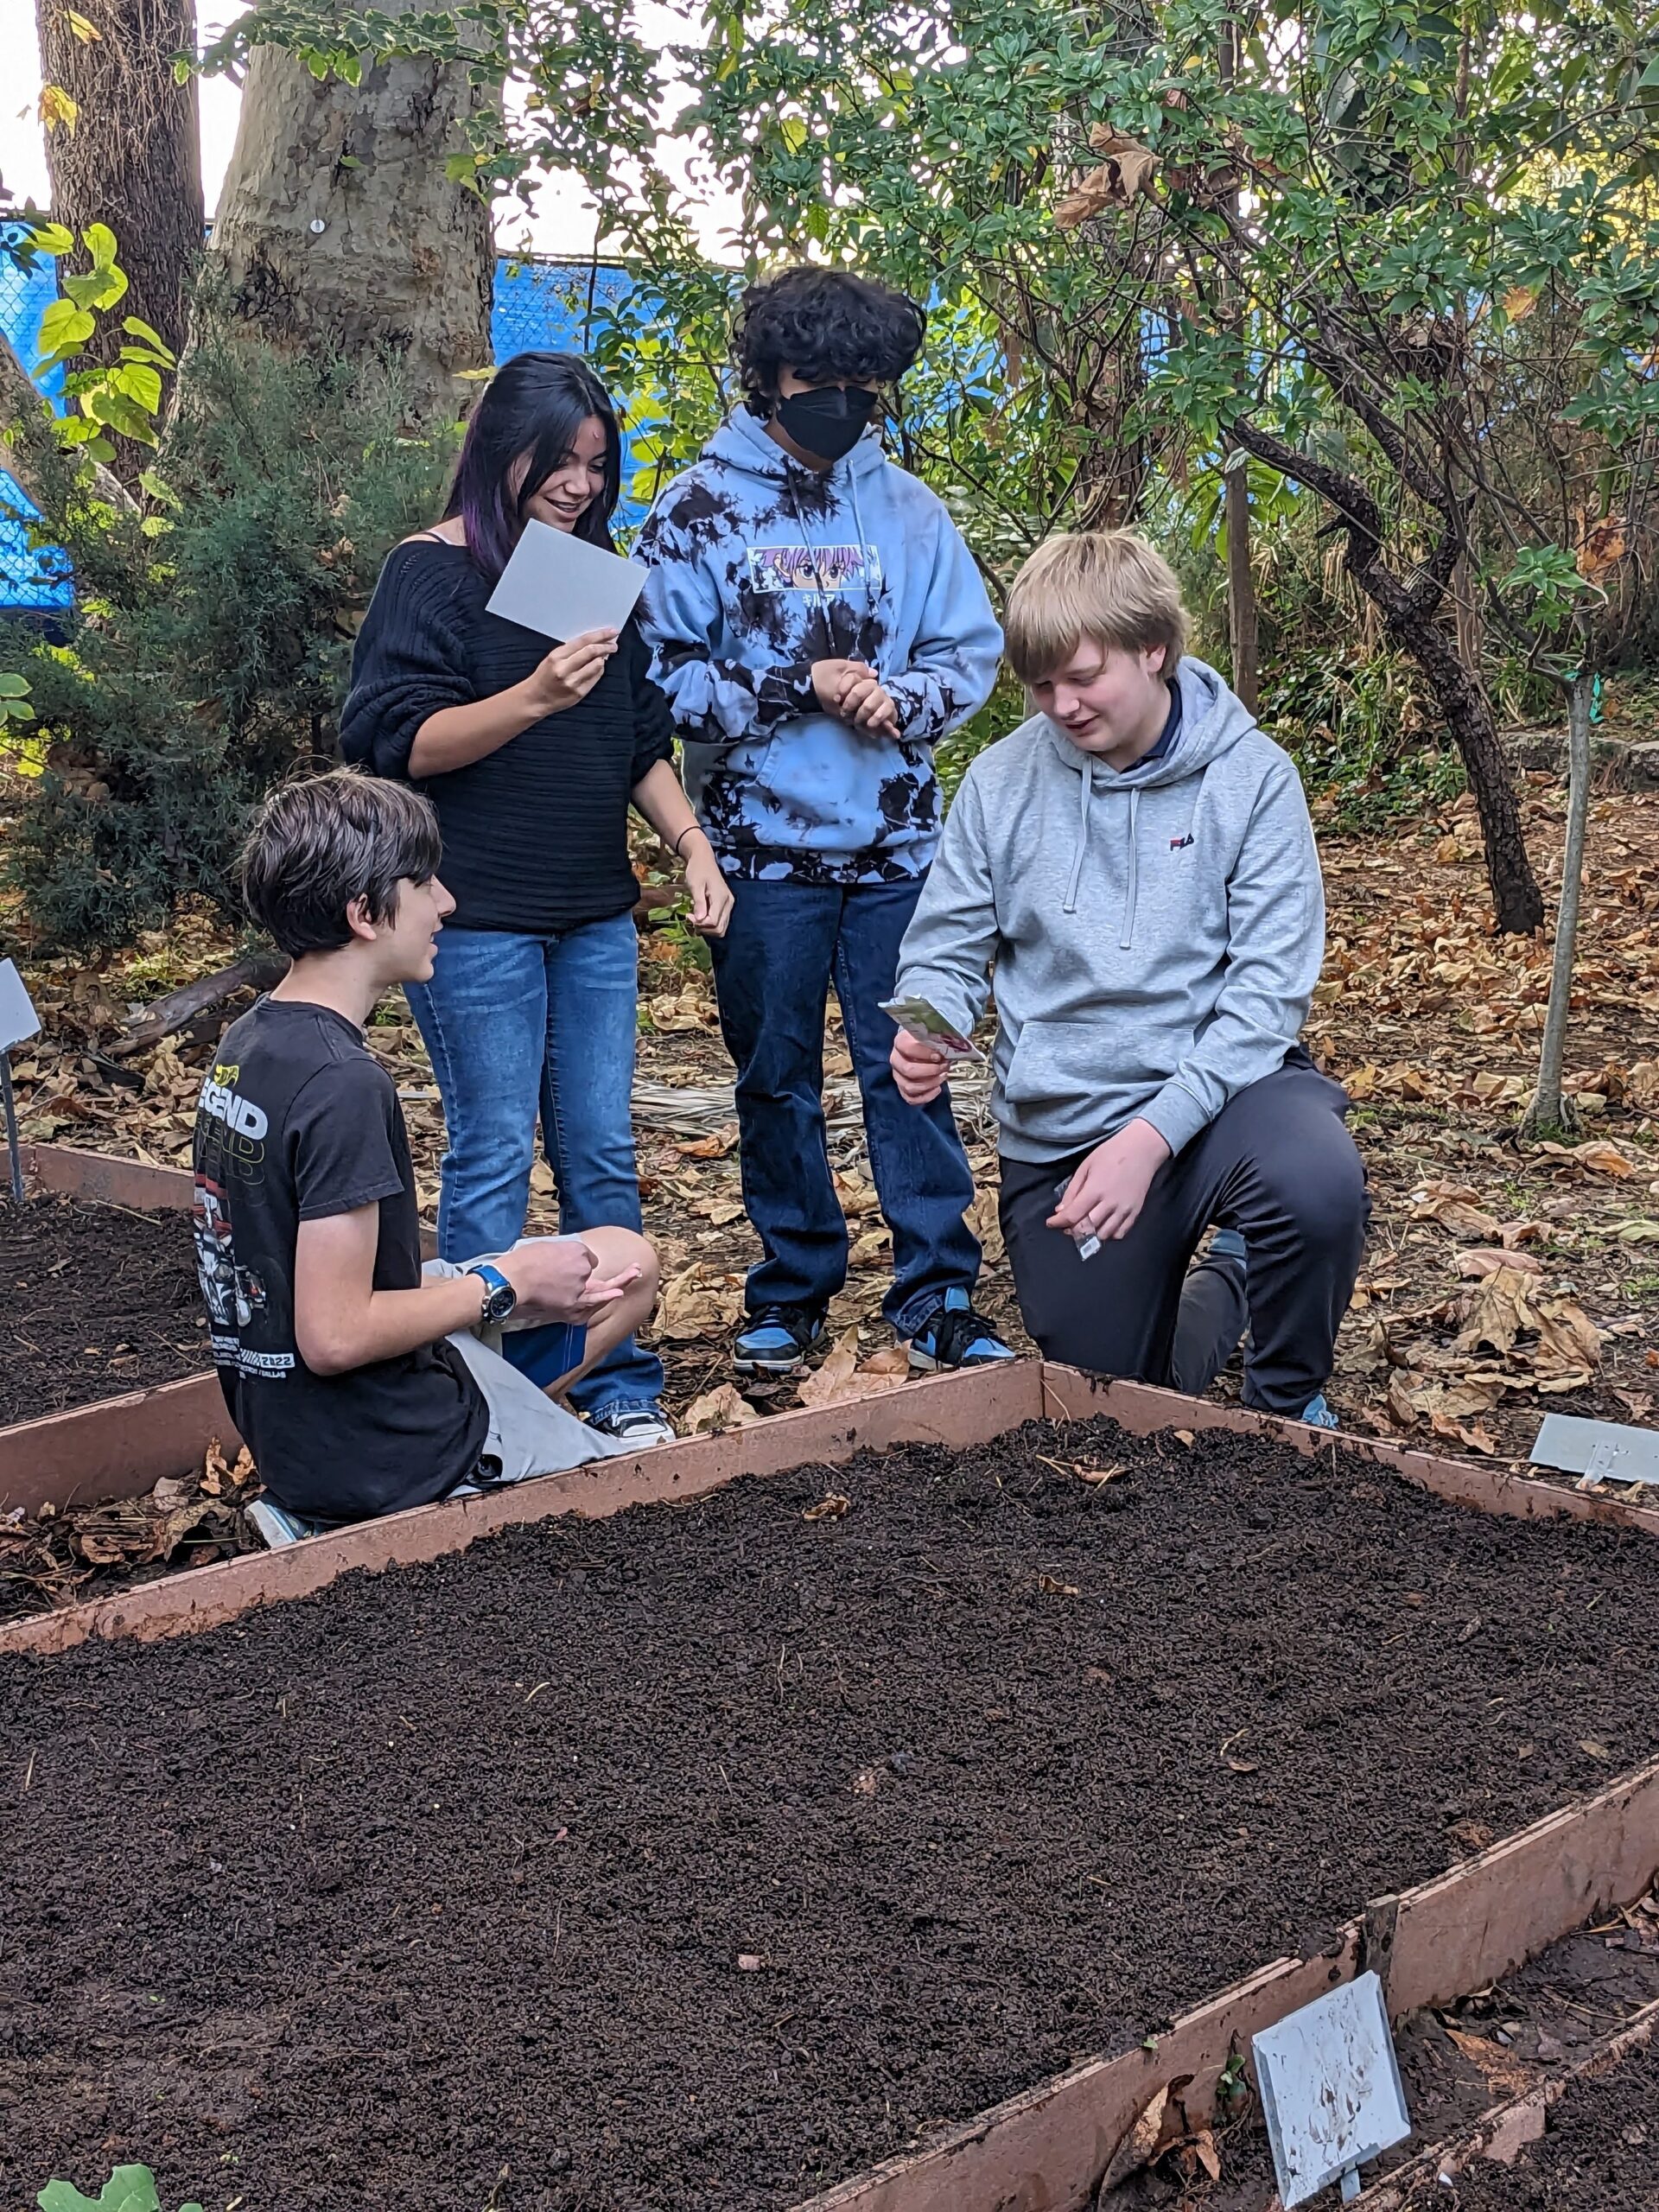 students planting seeds in a raised bed at their school garden